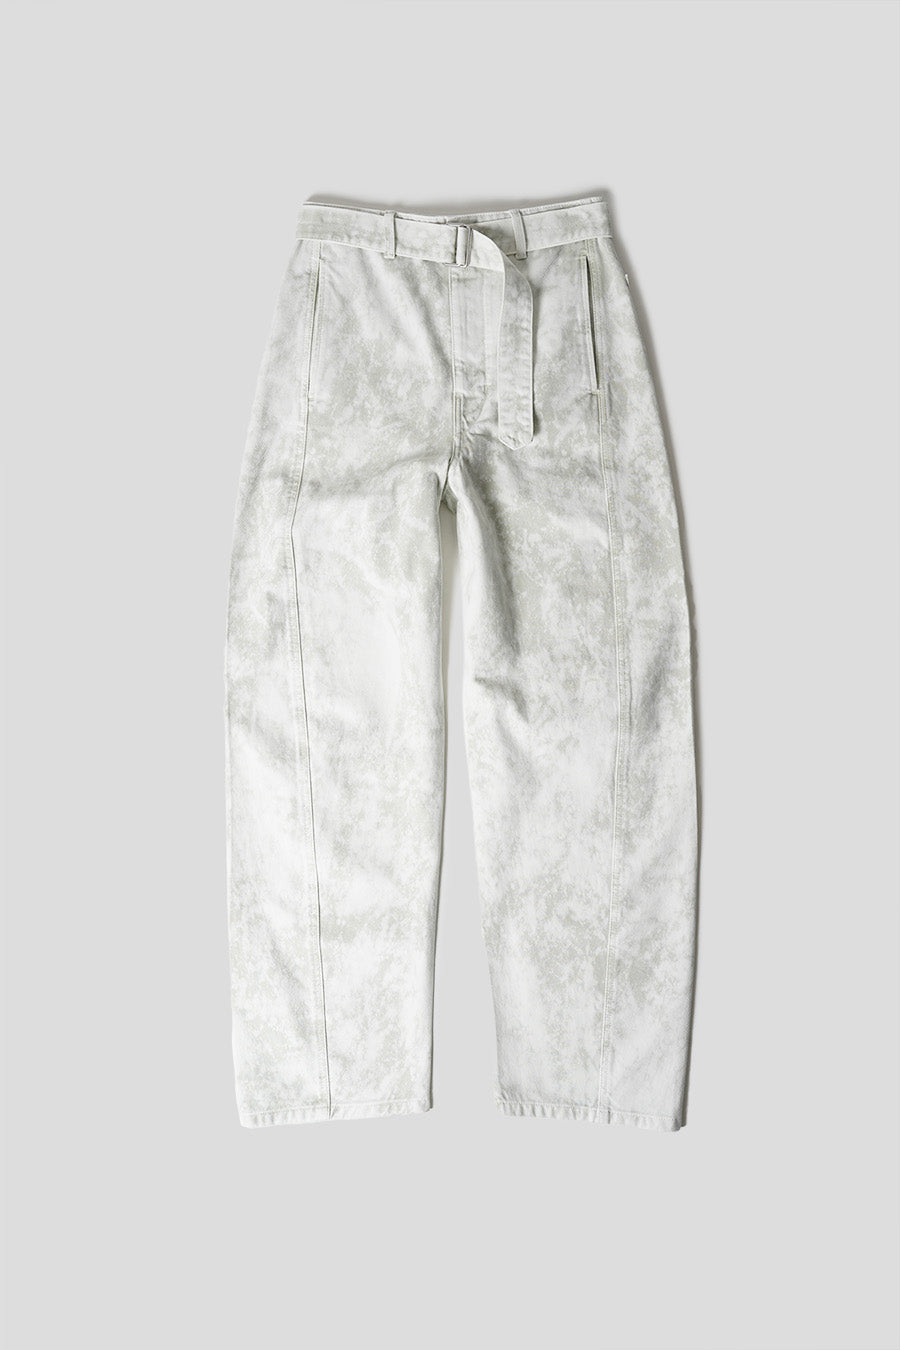 LEMAIRE - TWISTED BELTED TROUSERS LIGHT GREY - LE LABO STORE